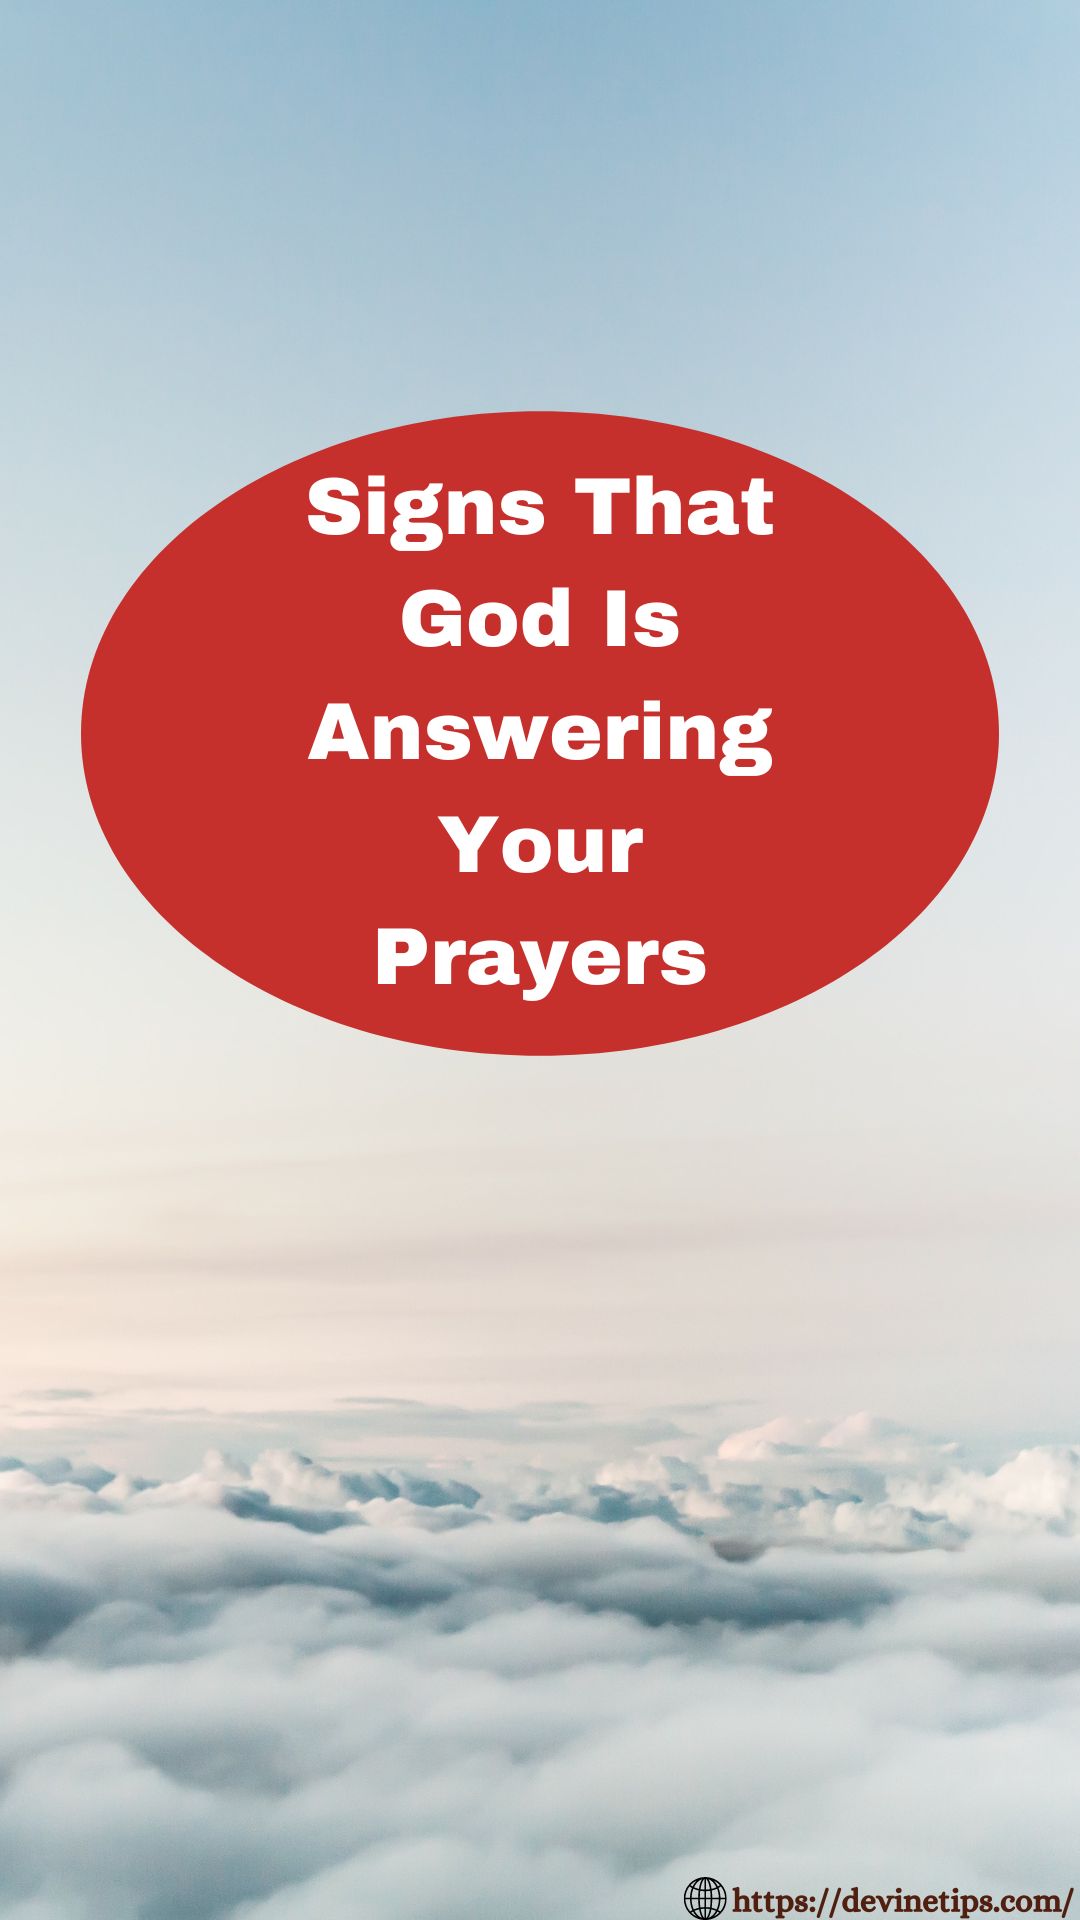 Signs That God Is Answering Your Prayers